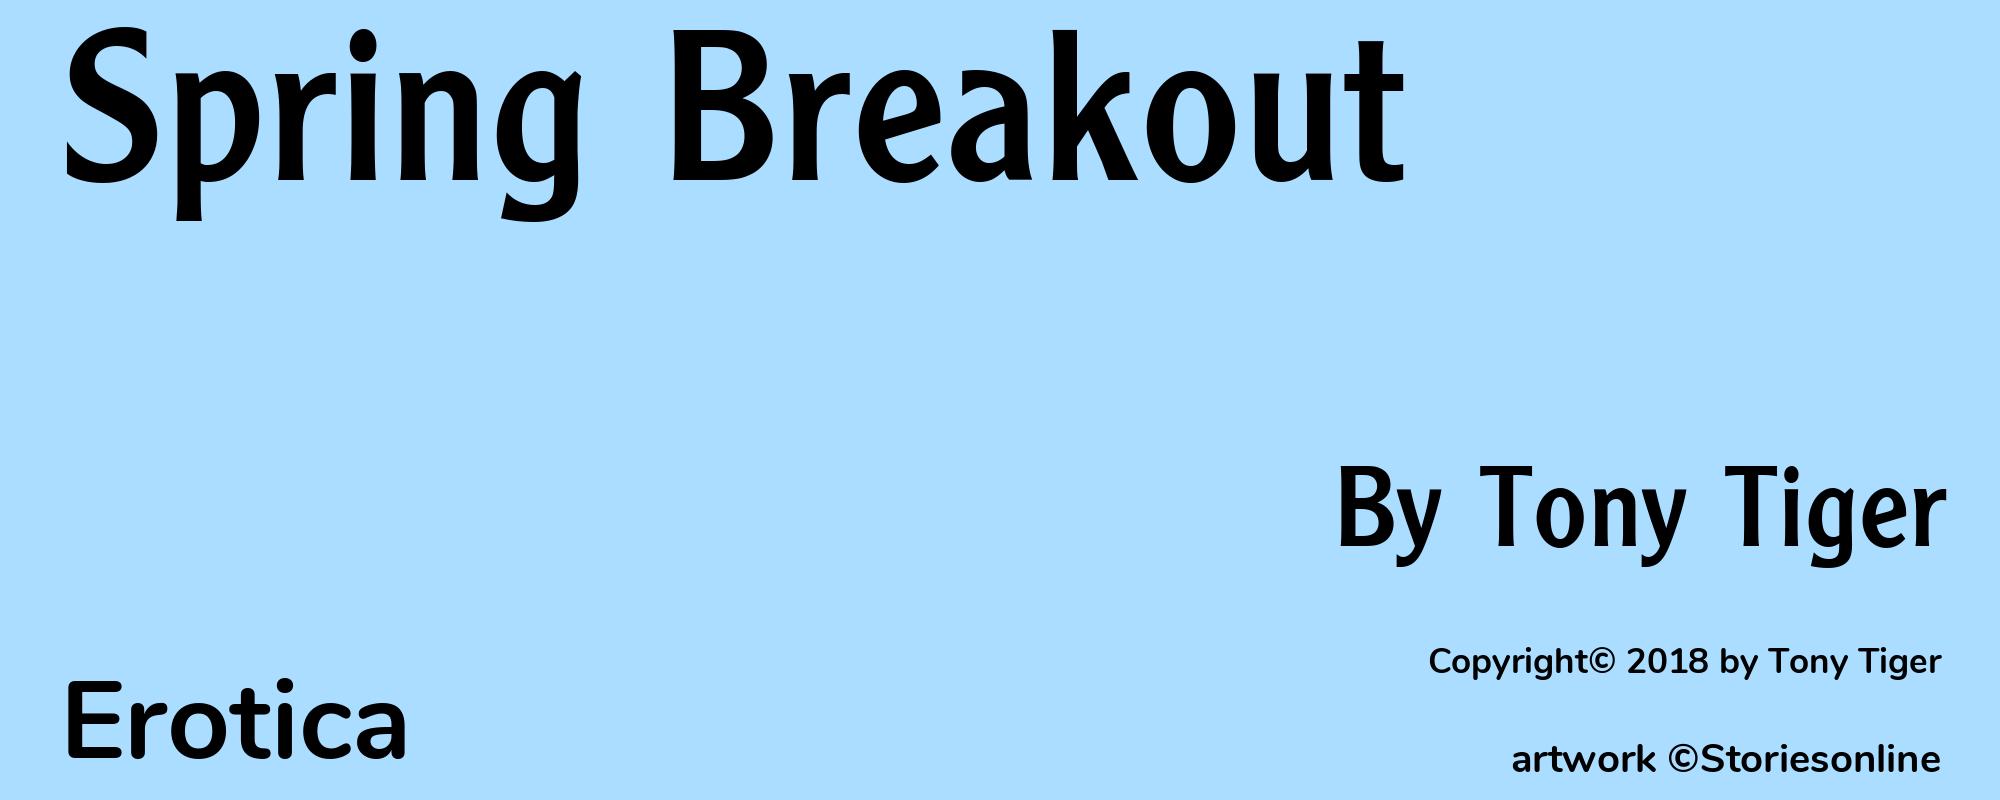 Spring Breakout - Cover